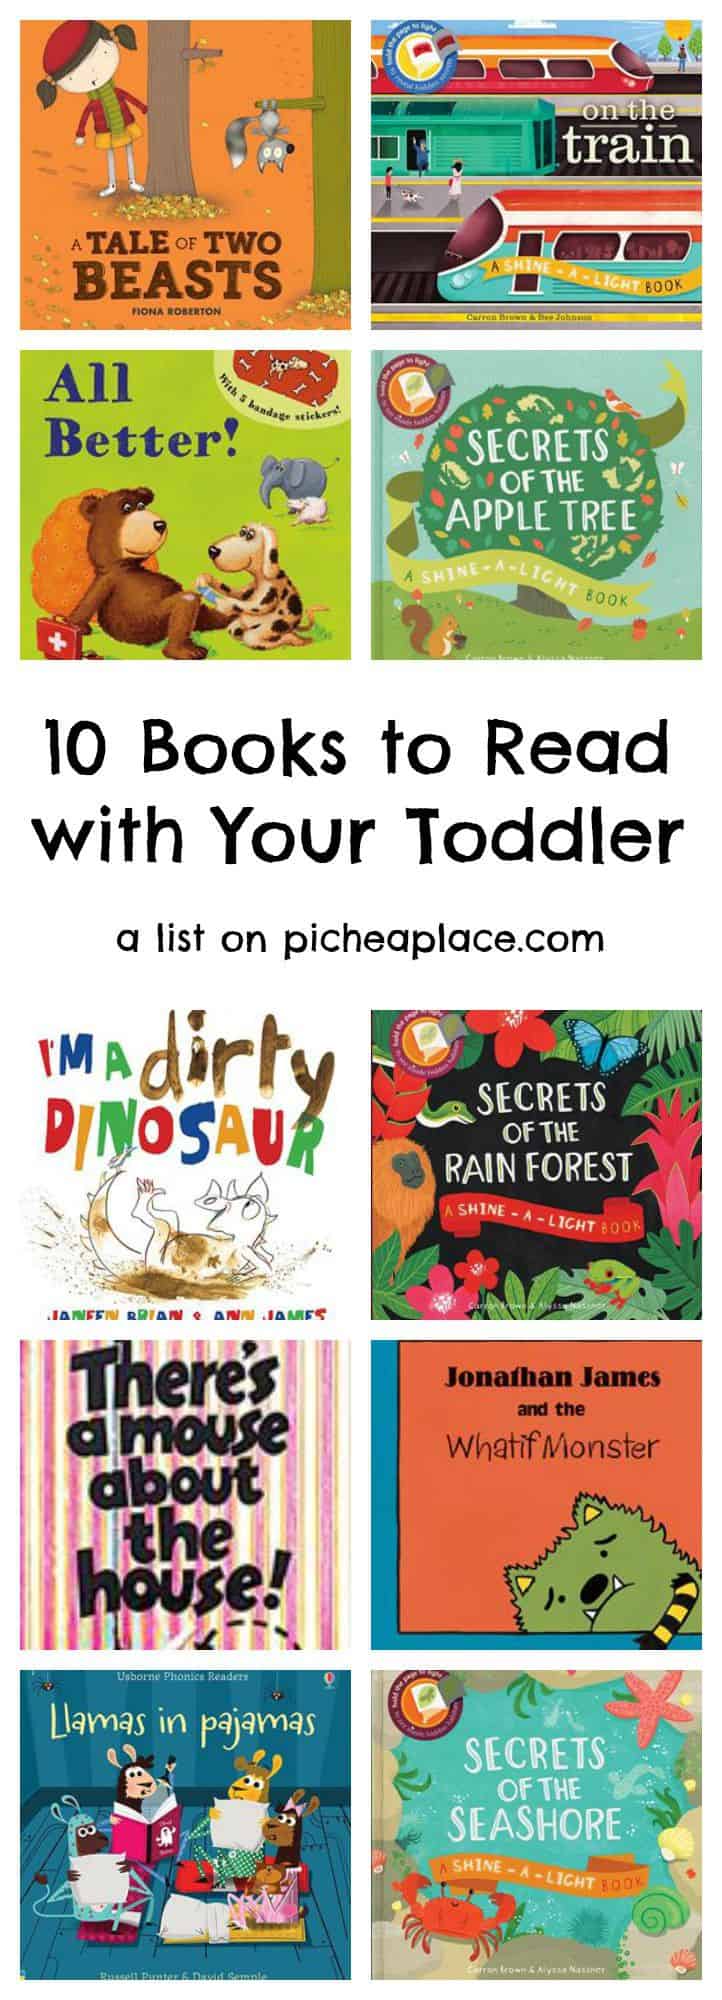 10 Books to Read with Your Toddler